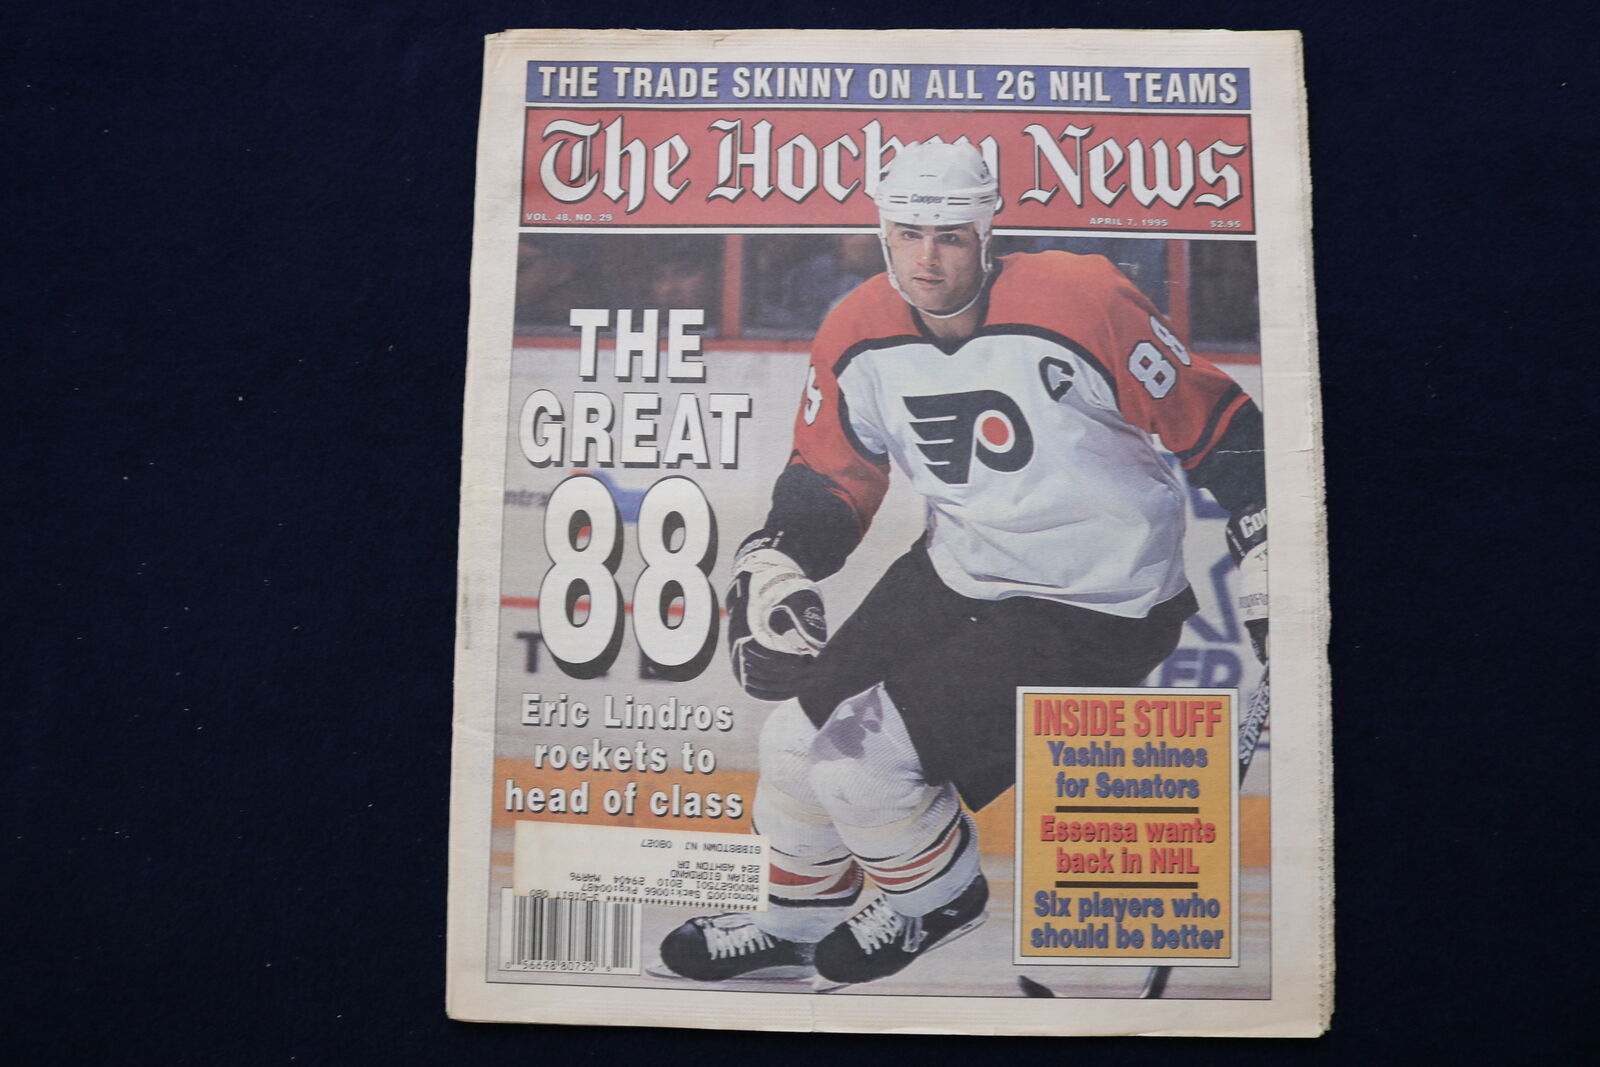 1995 APRIL 7 THE HOCKEY NEWS NEWSPAPER - ERIC LINDROS COVER - NP 8740